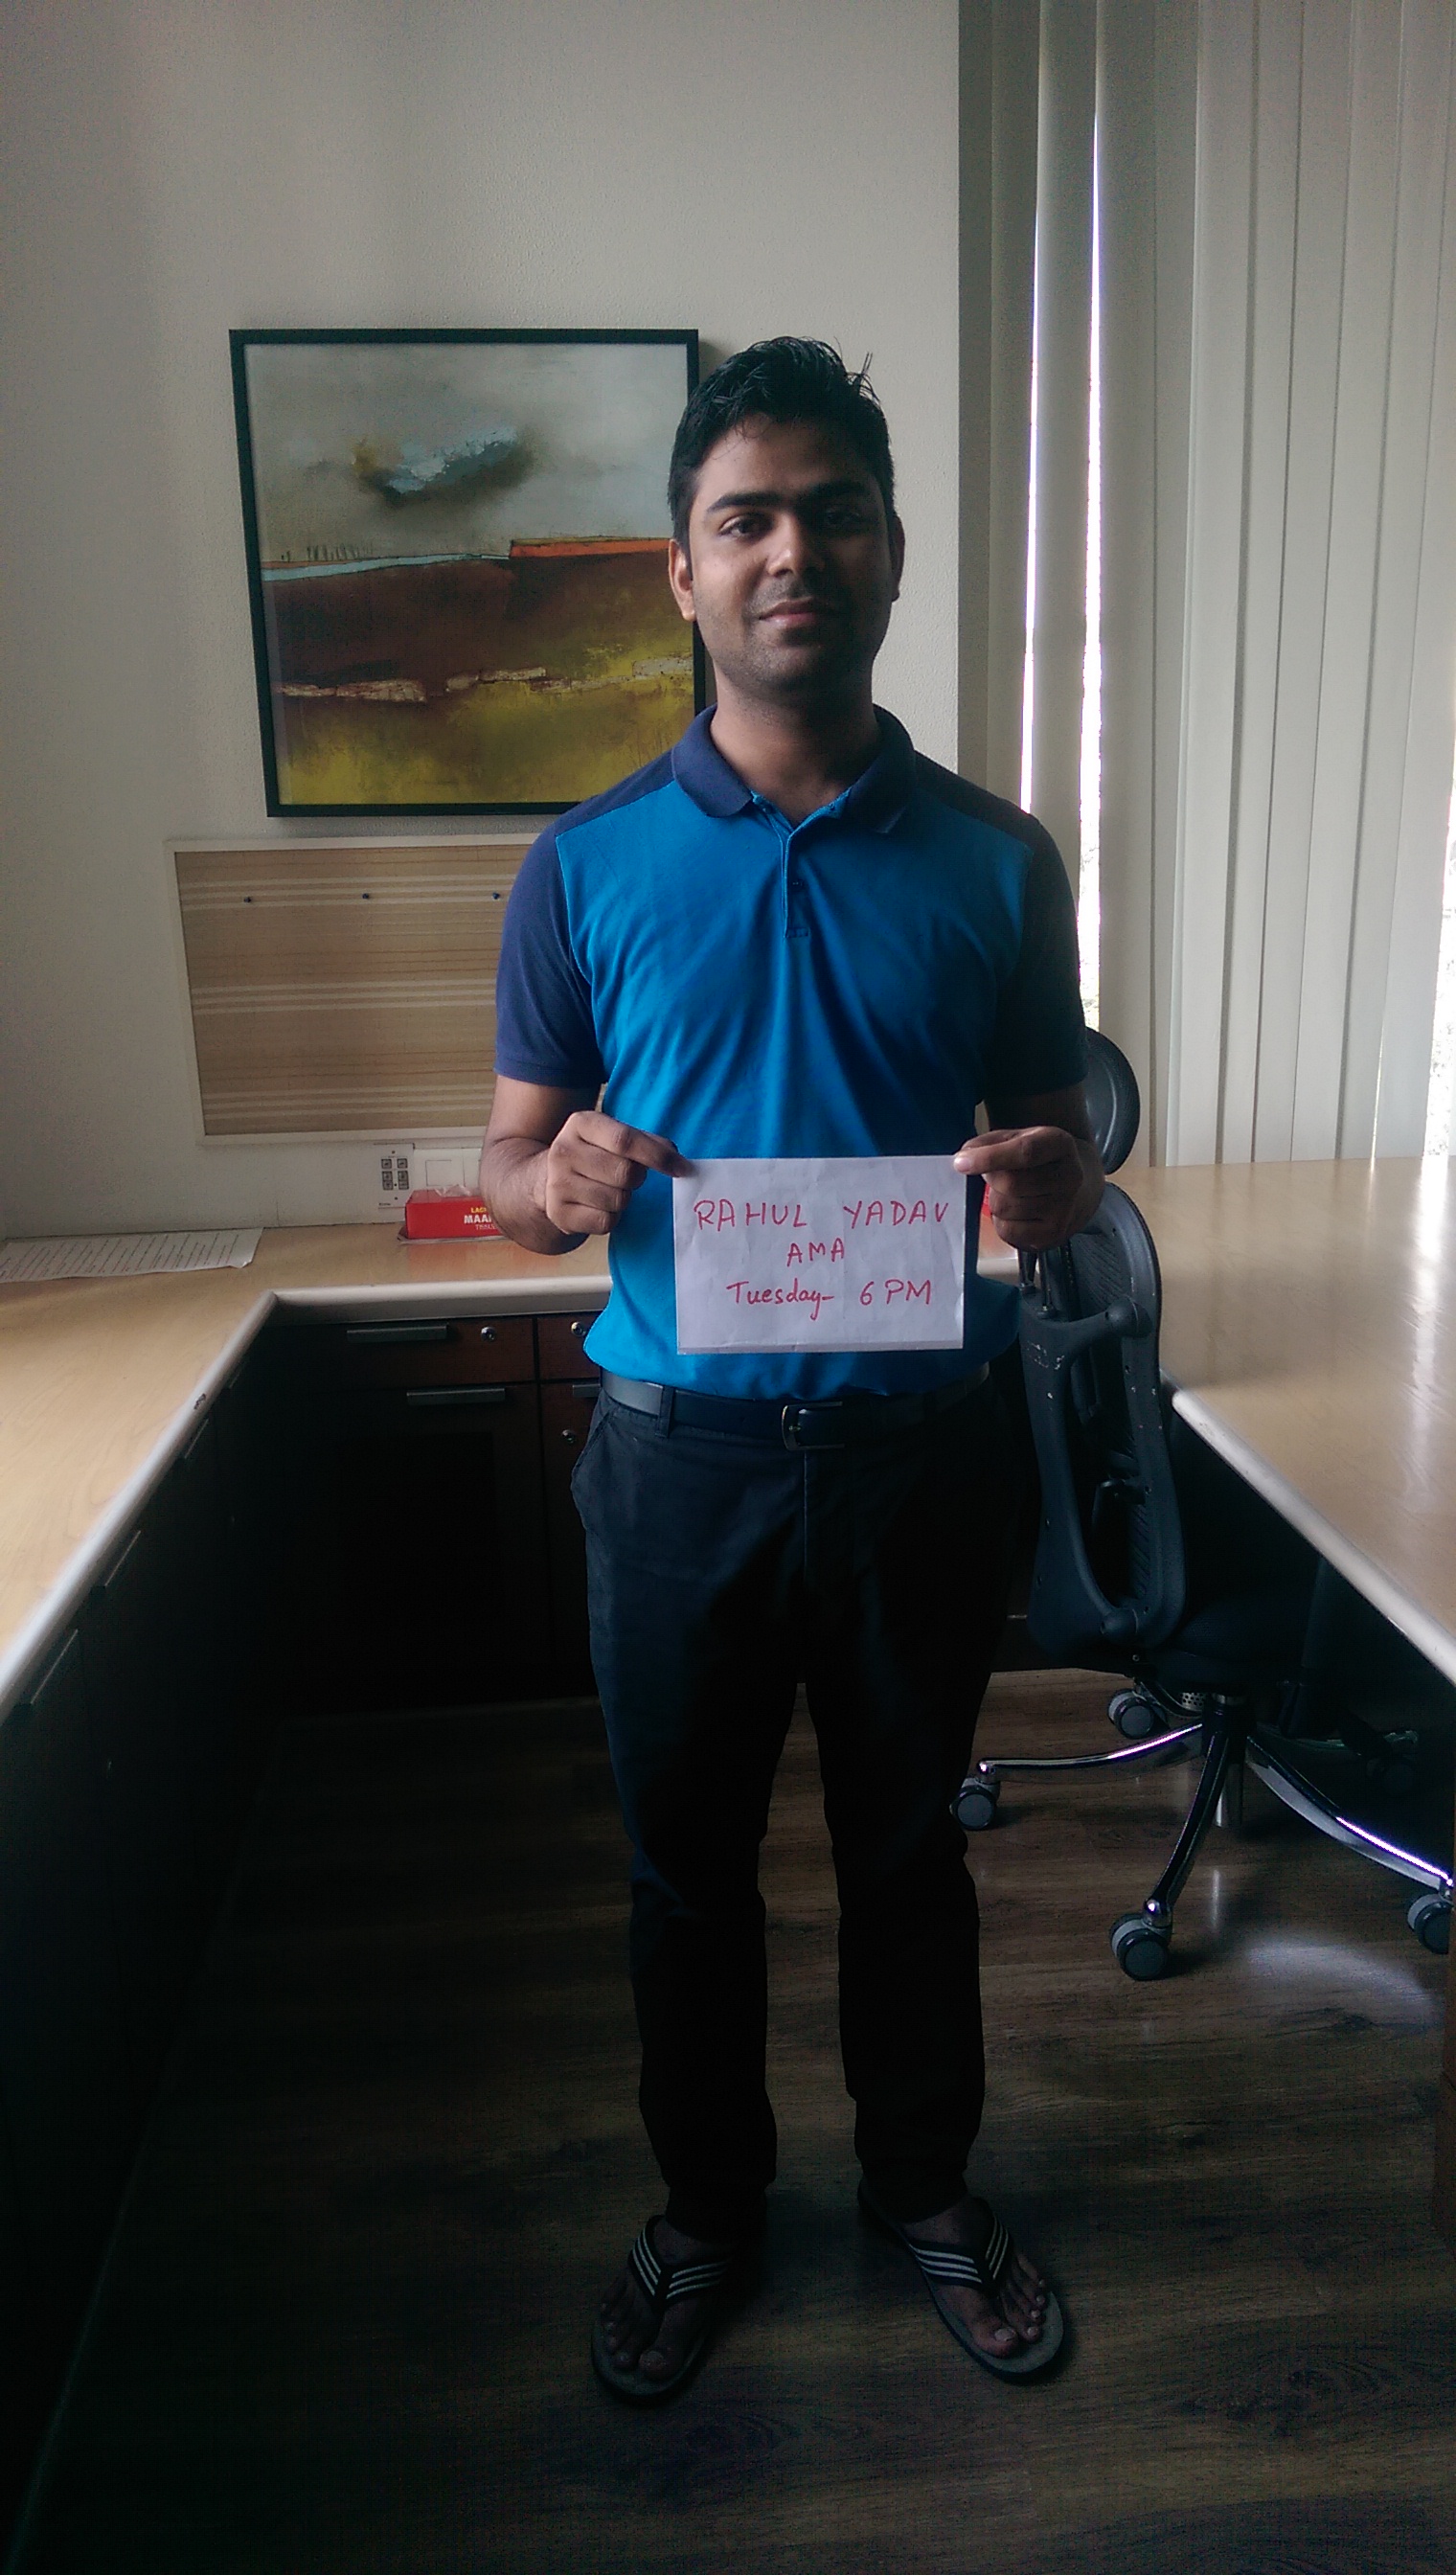 Rahul Yadav approves AMA session on tuesday 19th may 2015